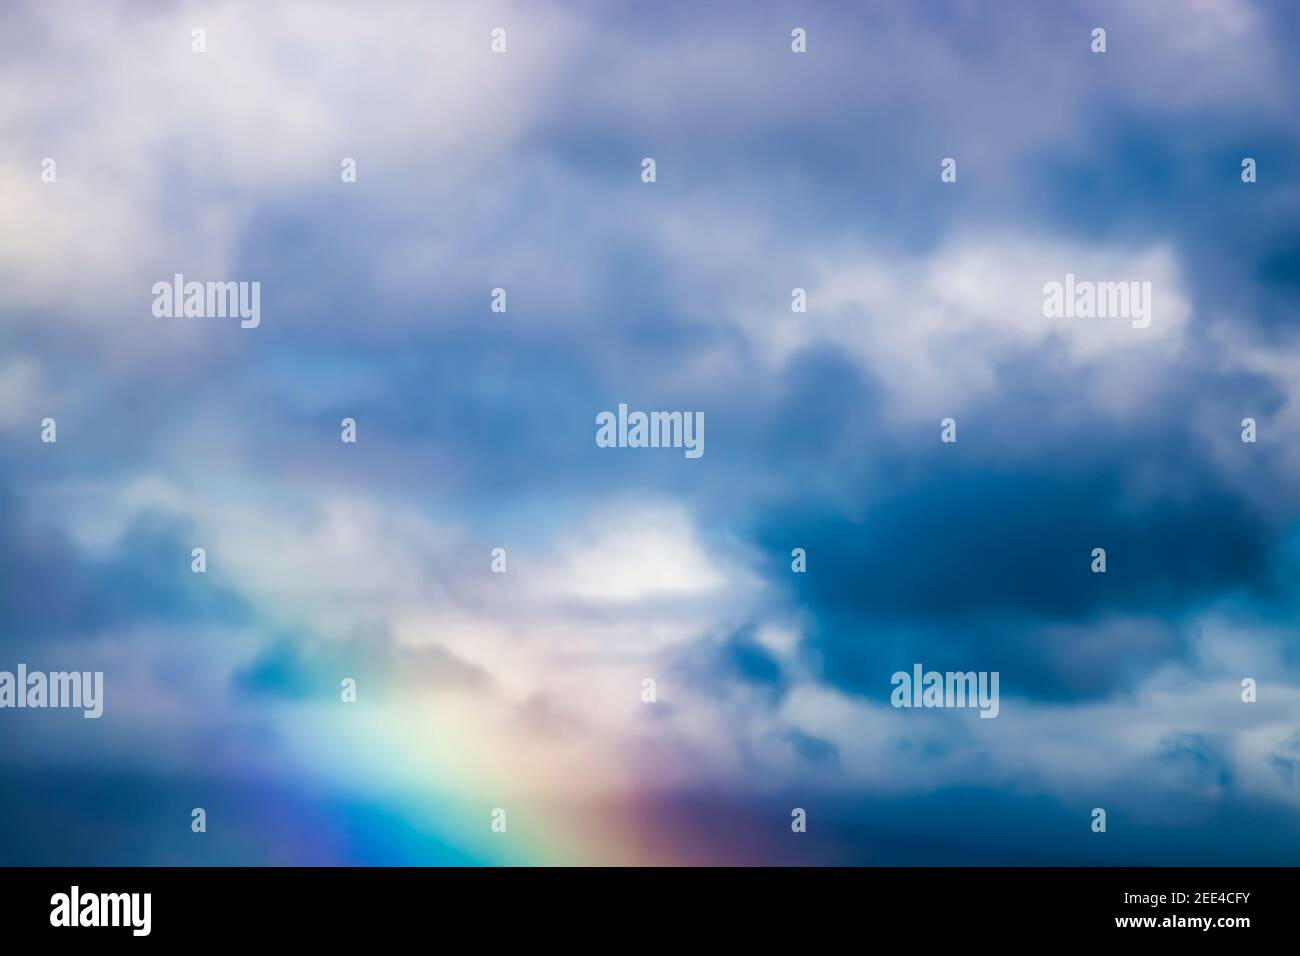 Clouds and rainbow fill close up image of tropical sky for background texture. Stock Photo